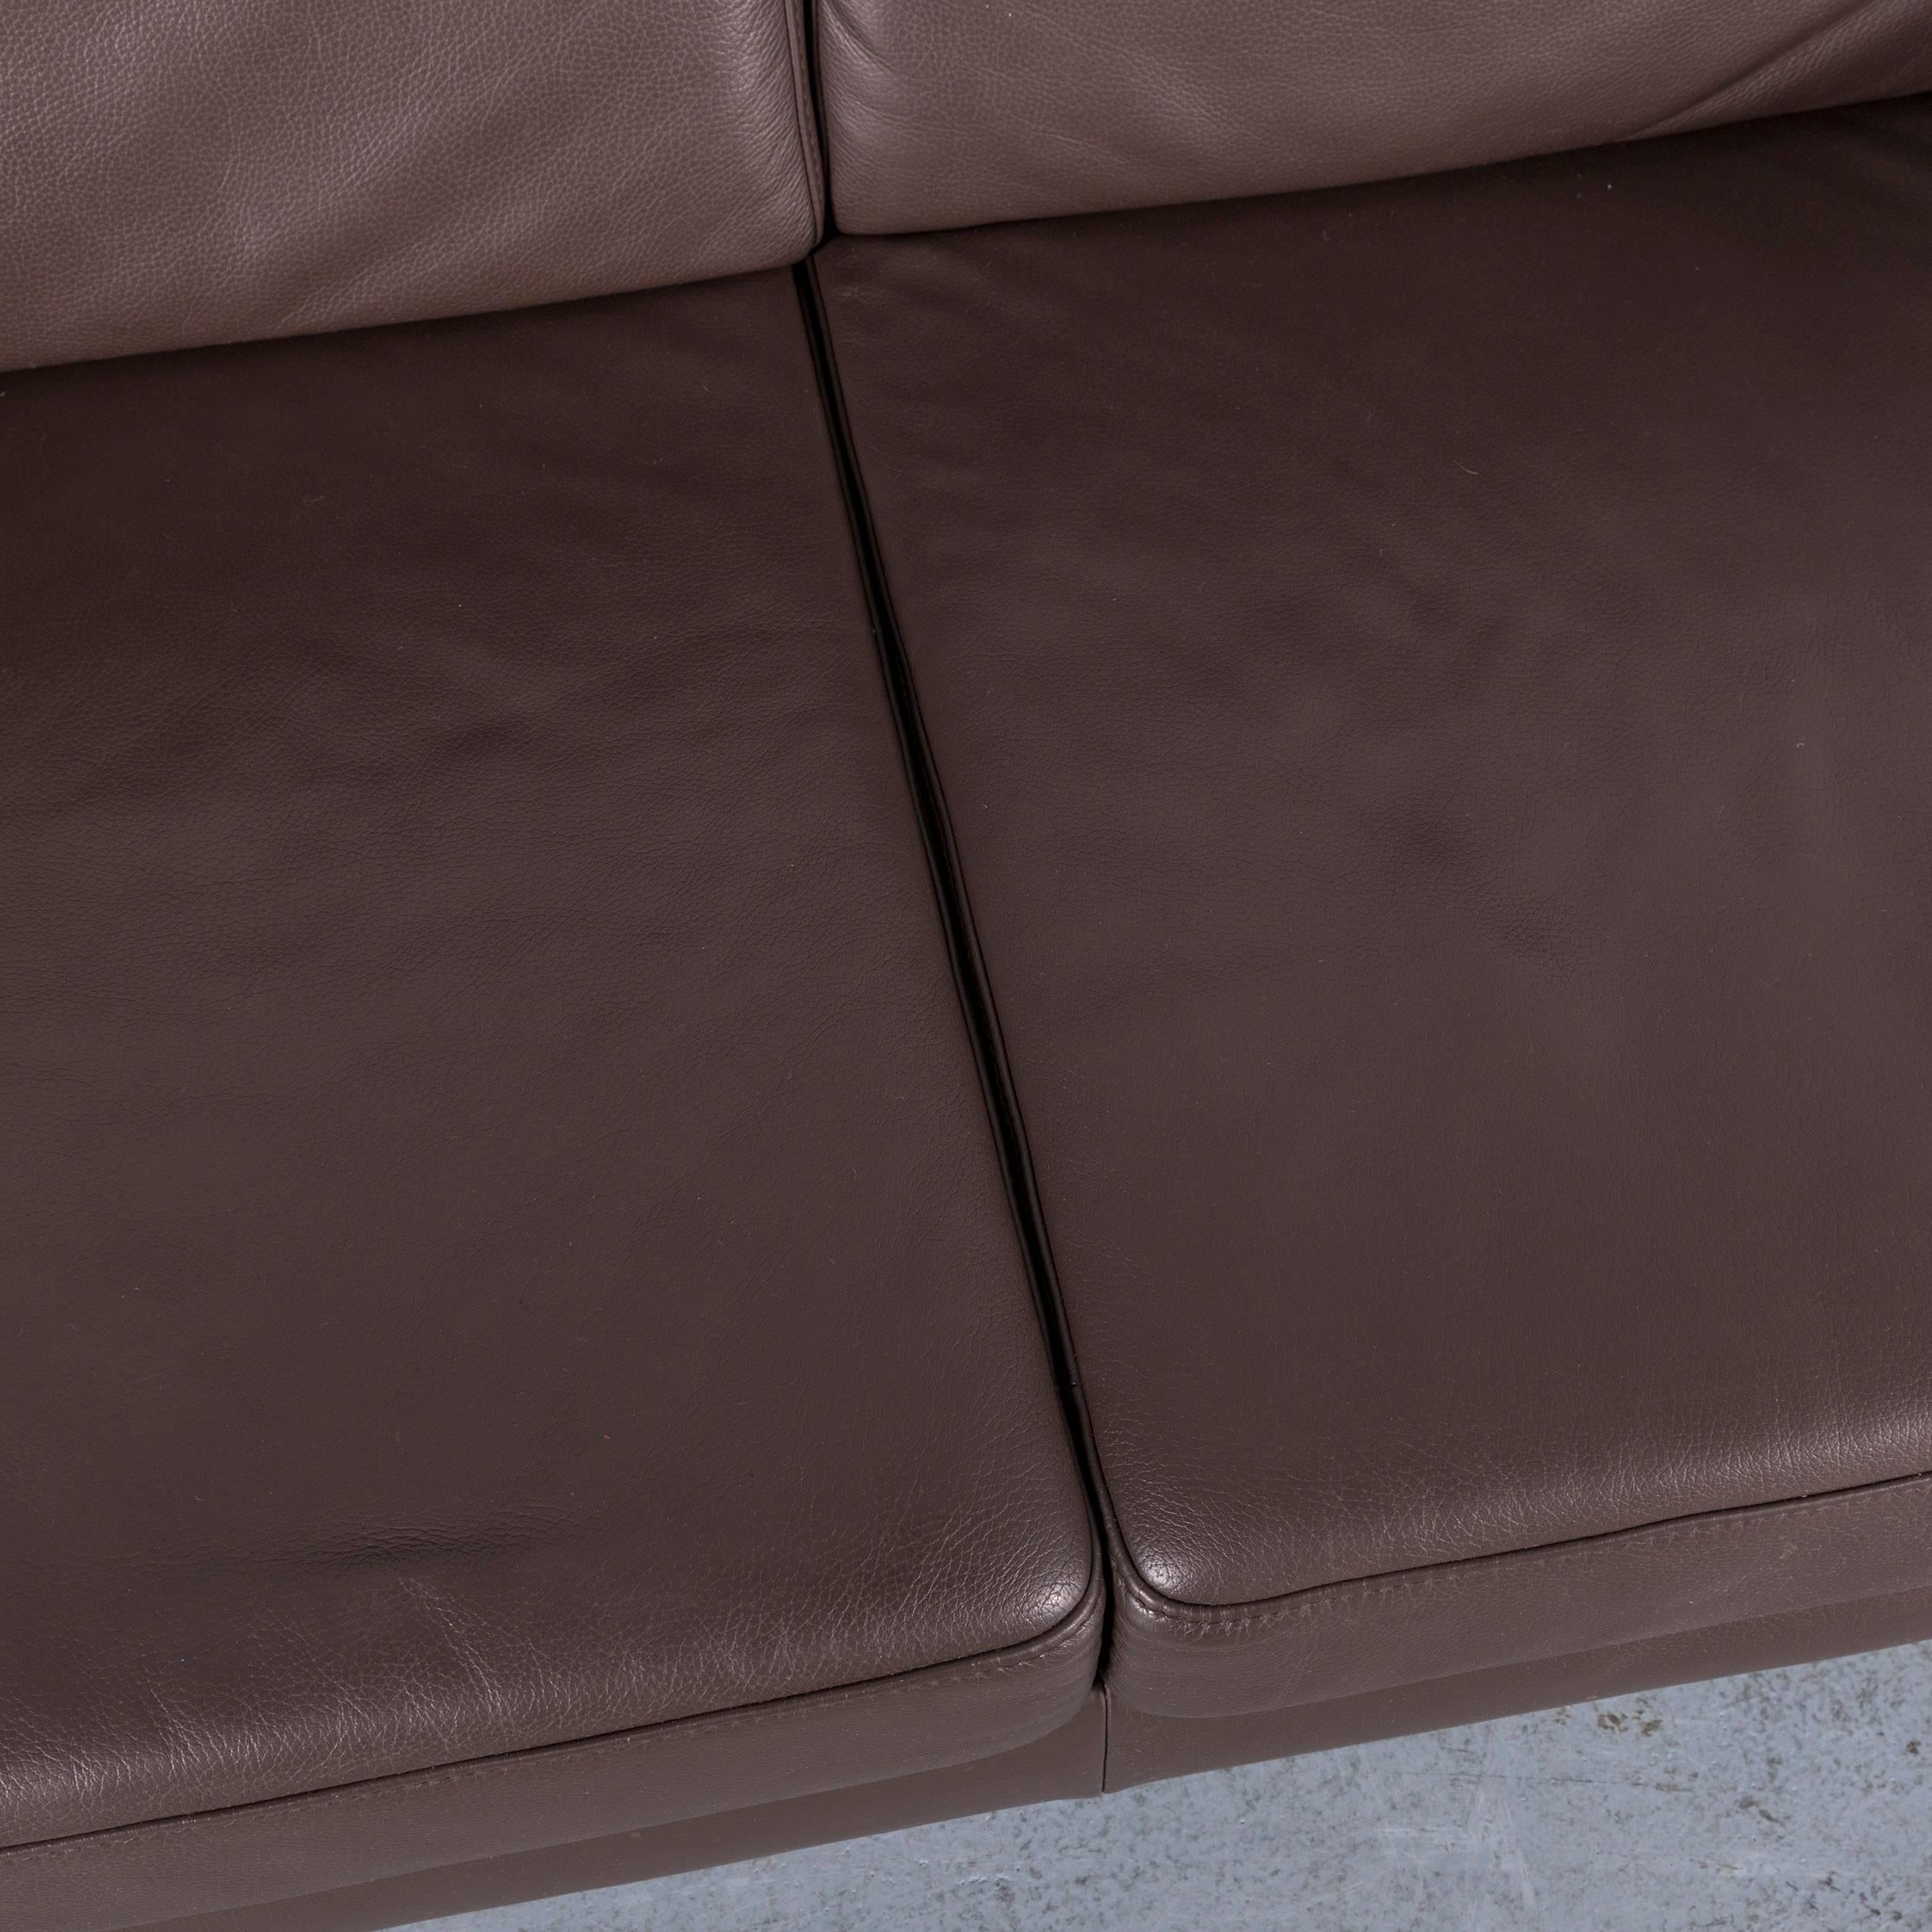 Ewald Schillig Designer Leather Sofa Brown Two-Seat In Good Condition For Sale In Cologne, DE